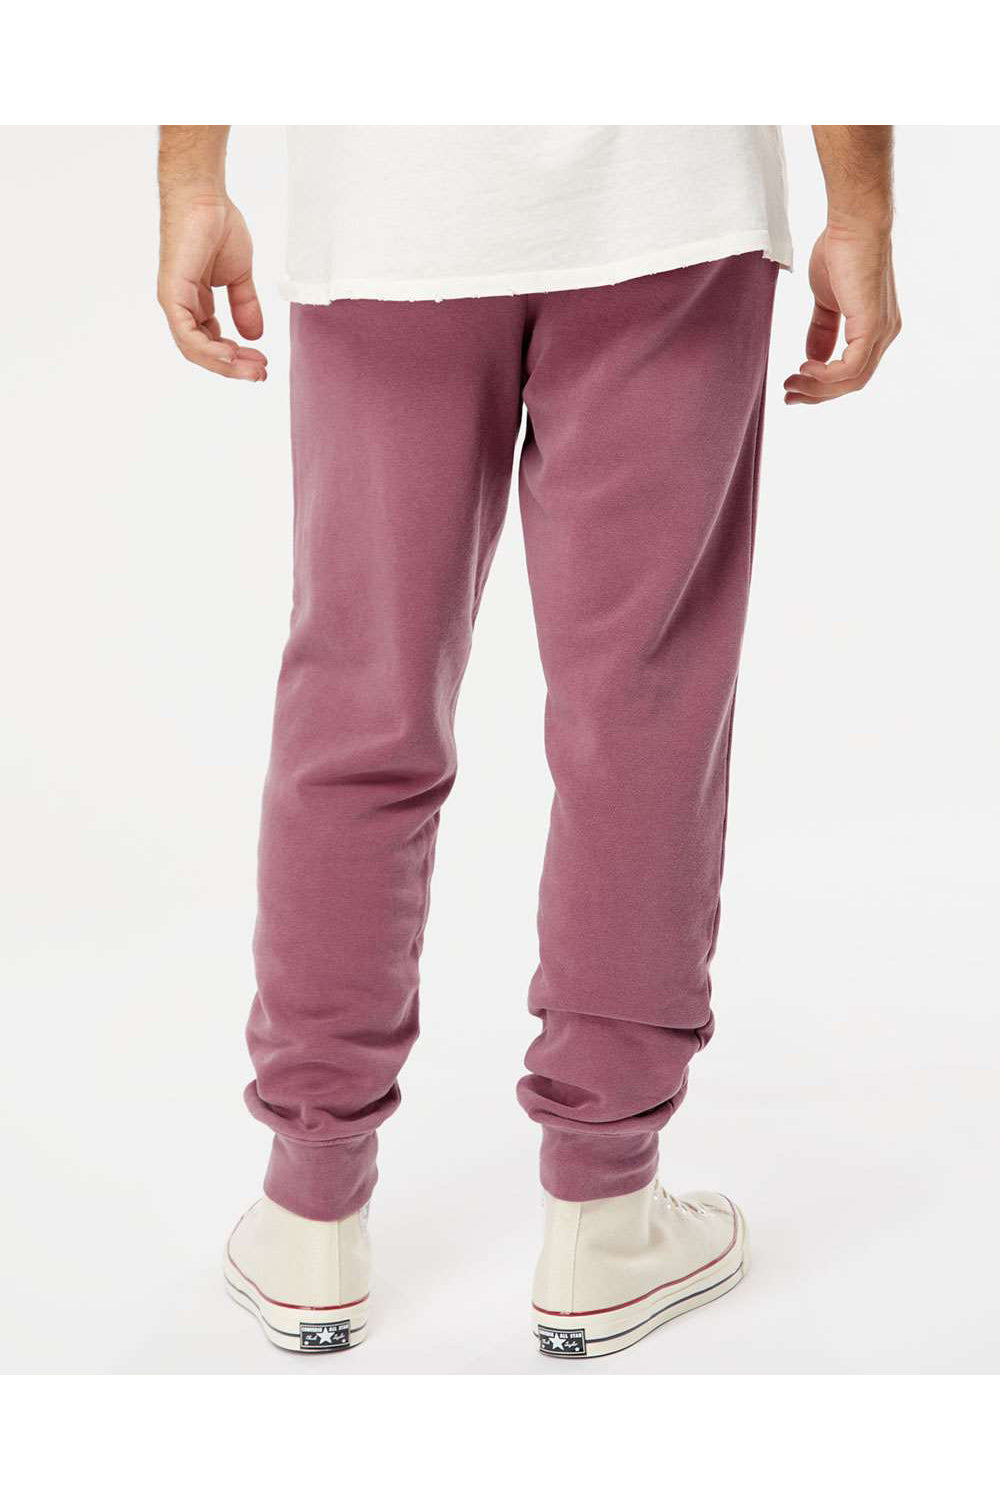 Independent Trading Co. PRM50PTPD Mens Pigment Dyed Fleece Sweatpants w/ Pockets Maroon Model Back